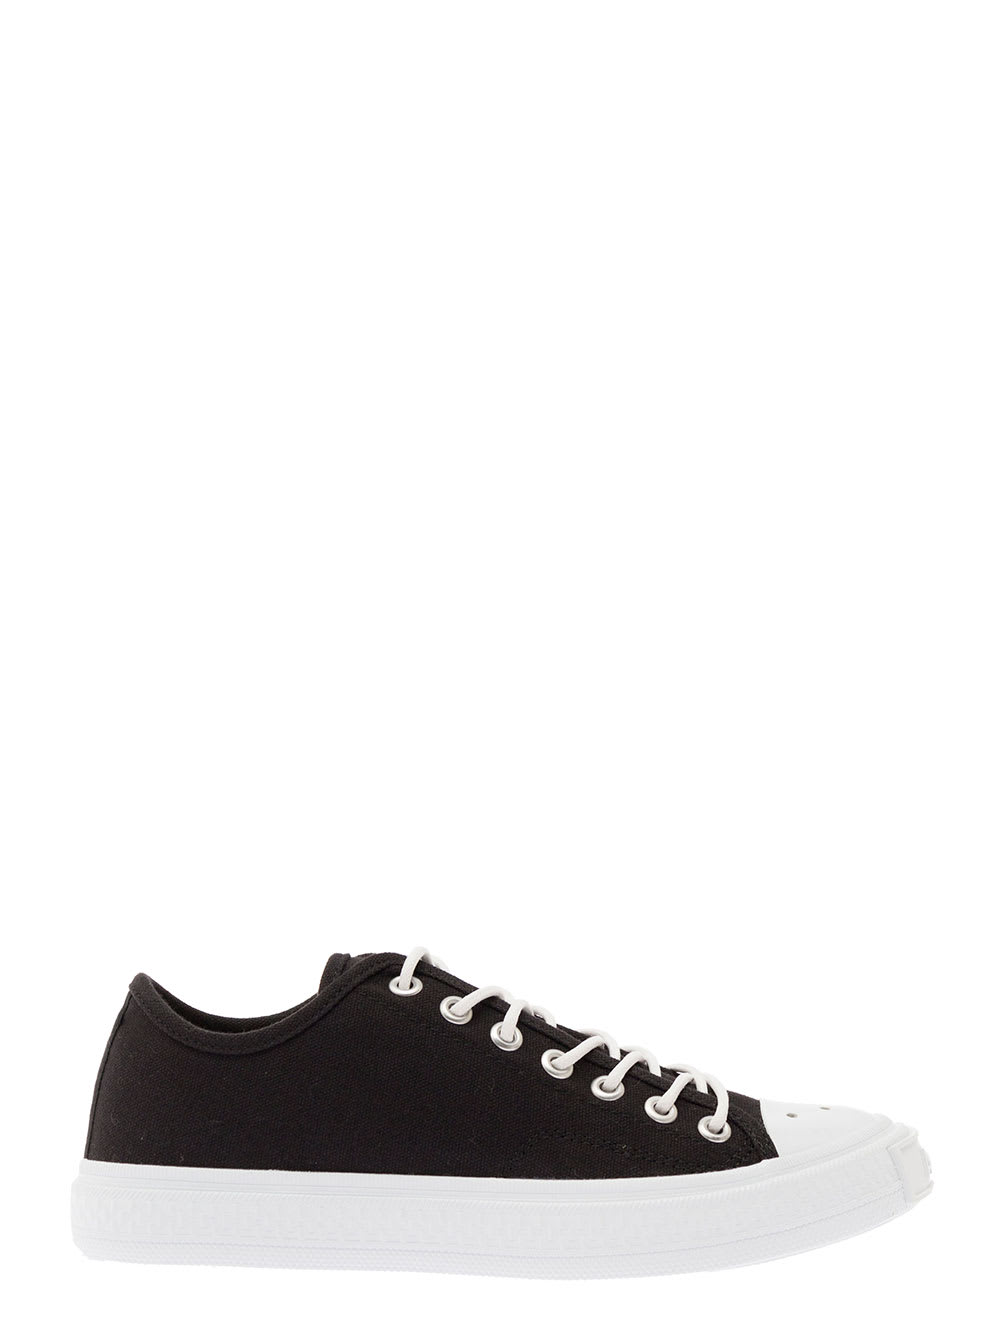 ACNE STUDIOS BLACK LOW-TOP SNEAKERS WITH FRONT LOGO PATCH IN COTTON CANVAS WOMAN